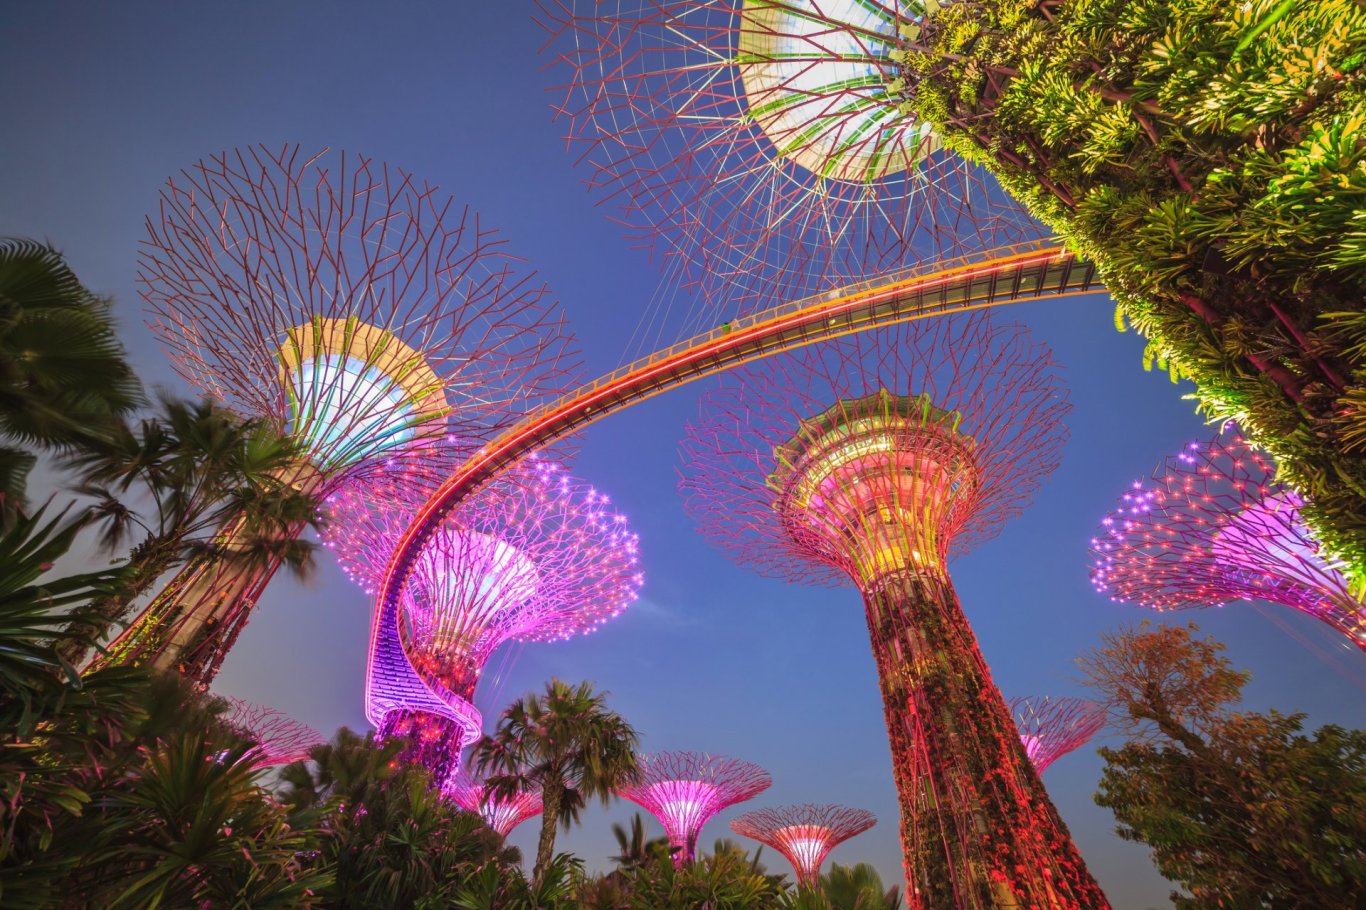 View looking up to the colour lights of the Gardens by the bay in Singapore